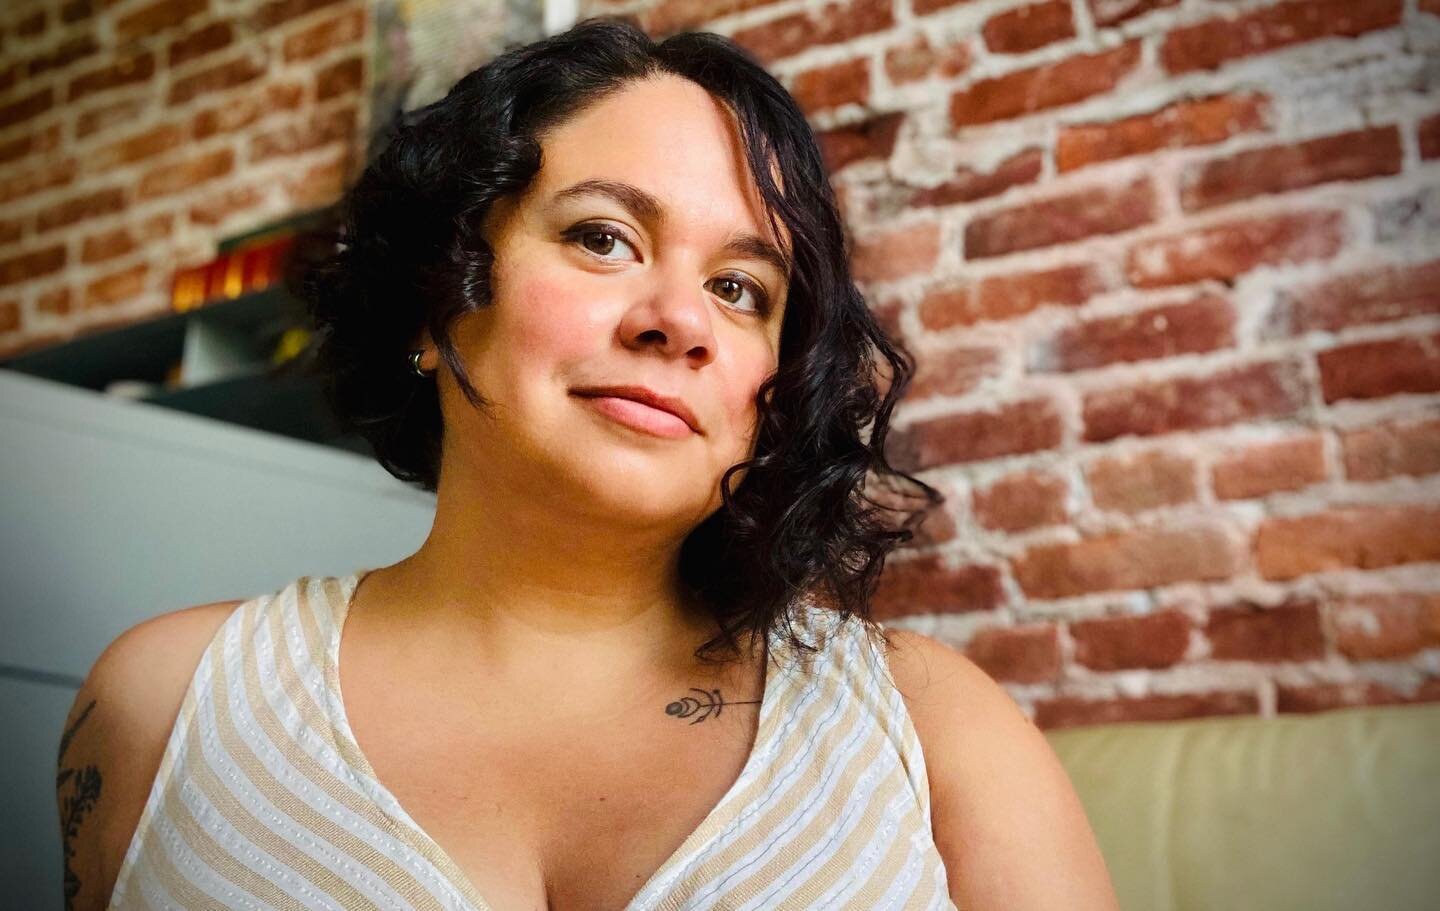 &iexcl;Mucho Gusto! 👋🏽 
 
With a new year approaching, it felt like time for a reintroduction! I&rsquo;m Meredith Mance (she/they), the primary midwife and owner of Wilder Midwifery. I am a Mexican-American, licensed midwife, an internationally boa